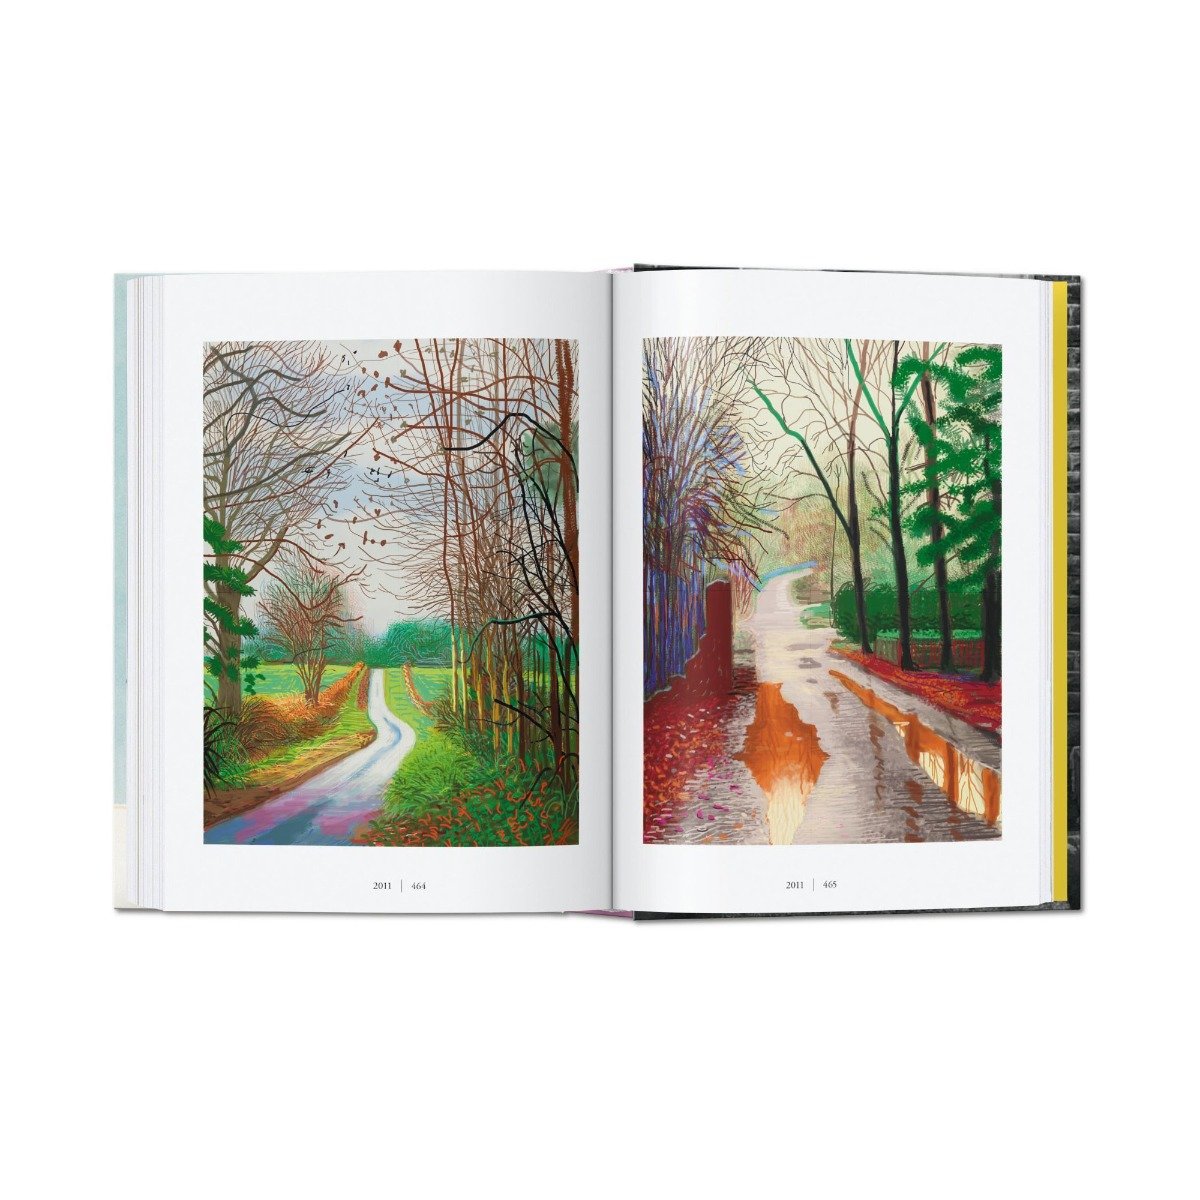 Two David Hockney paintings featured in A Chronology.